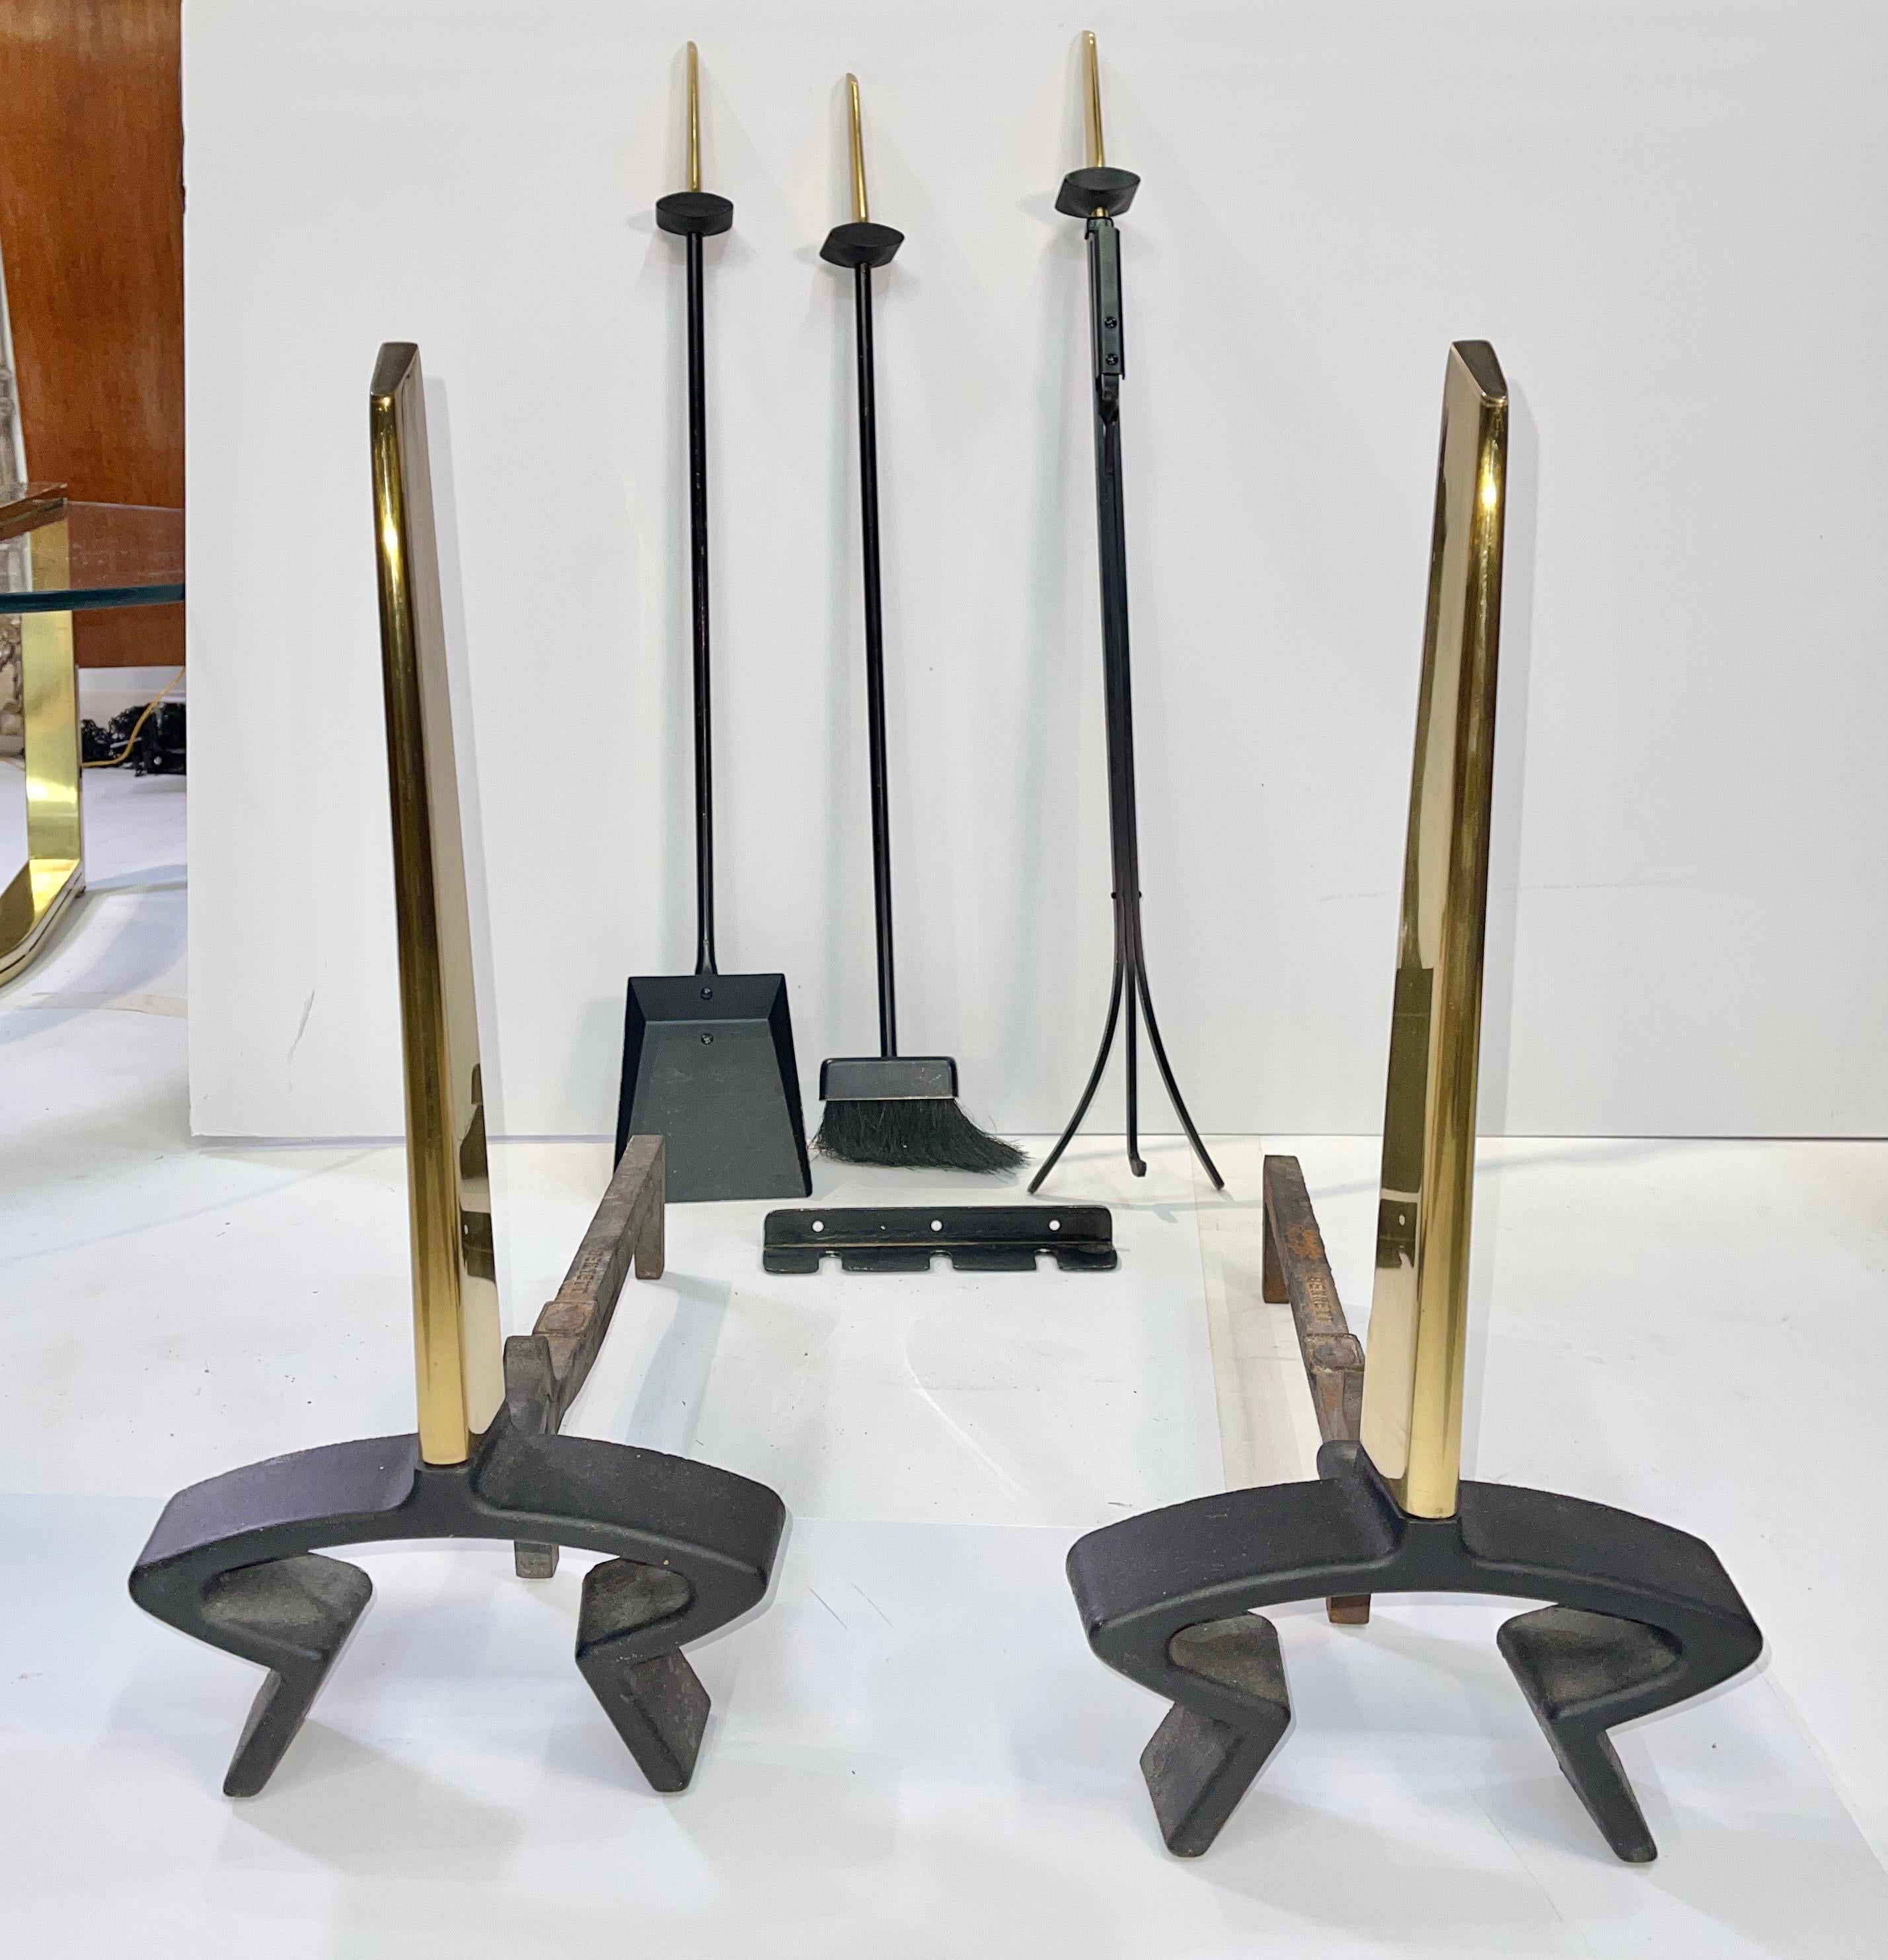 An original five piece set of modernist Art Deco andirons and matching fireside tools designed by Donald Deskey and produced by Bennett-Ireland Company of Norwich, NY. Sculptural hefty brass handles on the broom, shovel and claw poker. The three